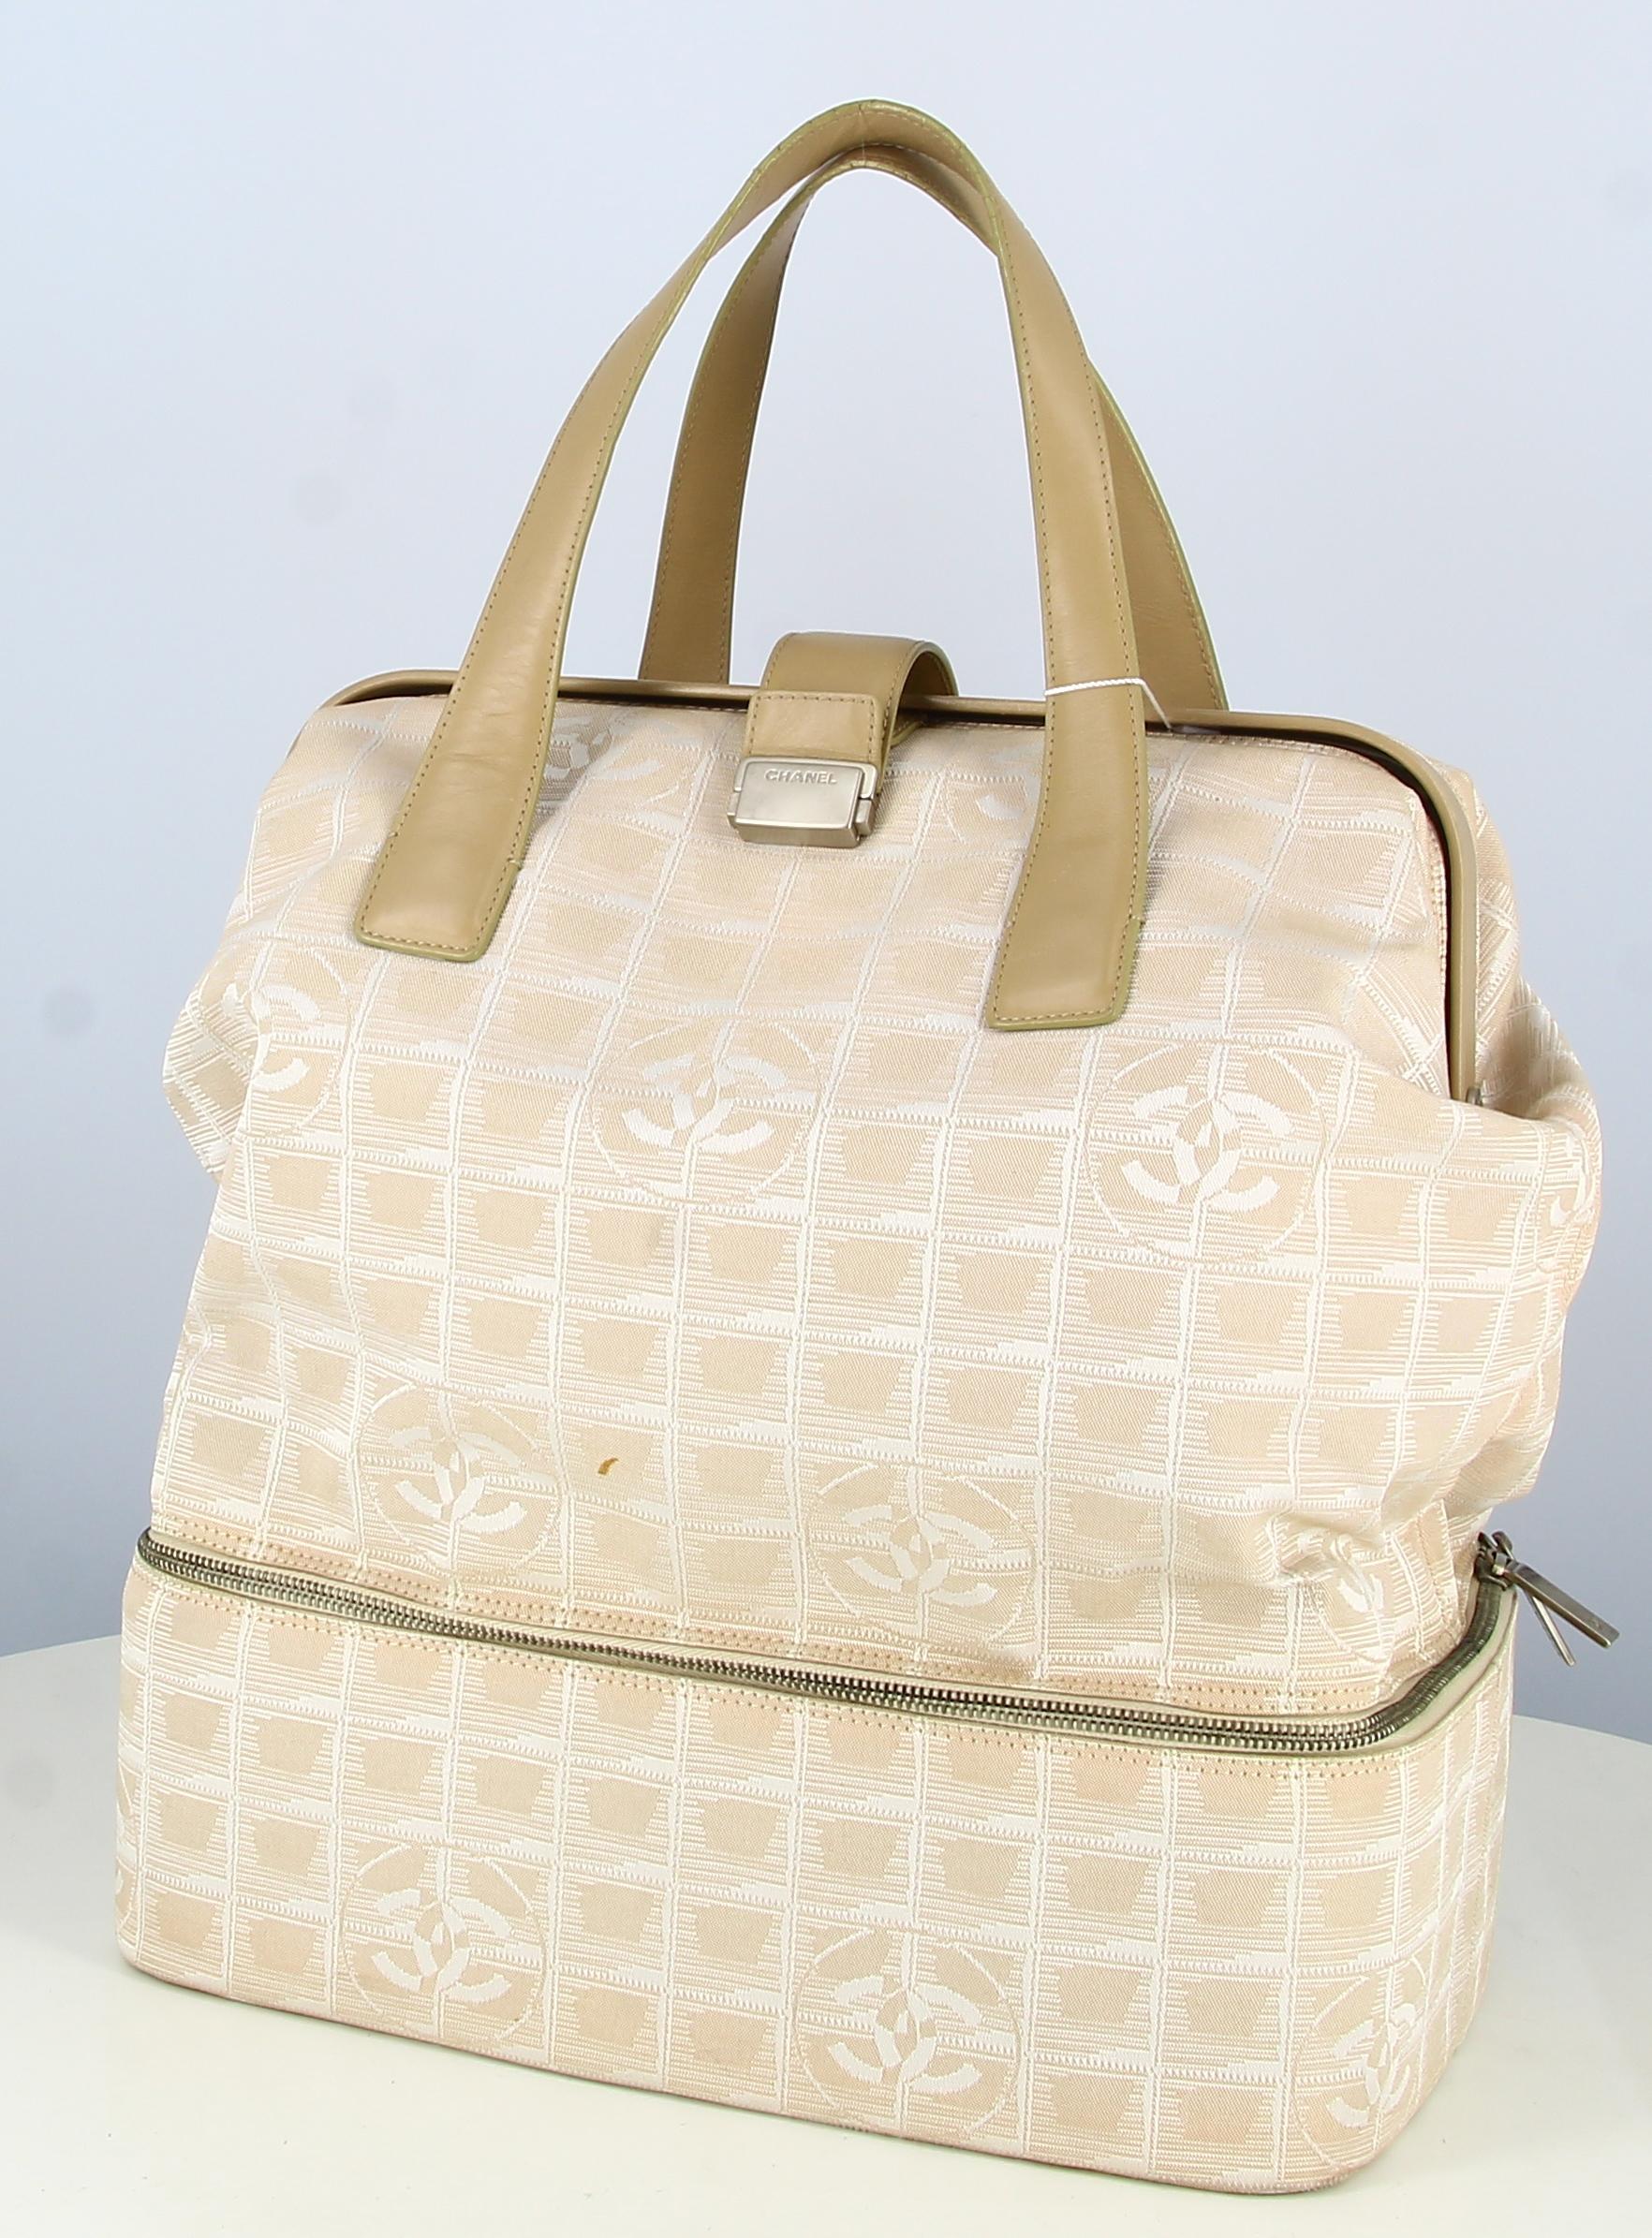 Beige 1999 Tote Bag Chanel Fabrics In Pink Monogram For Sale